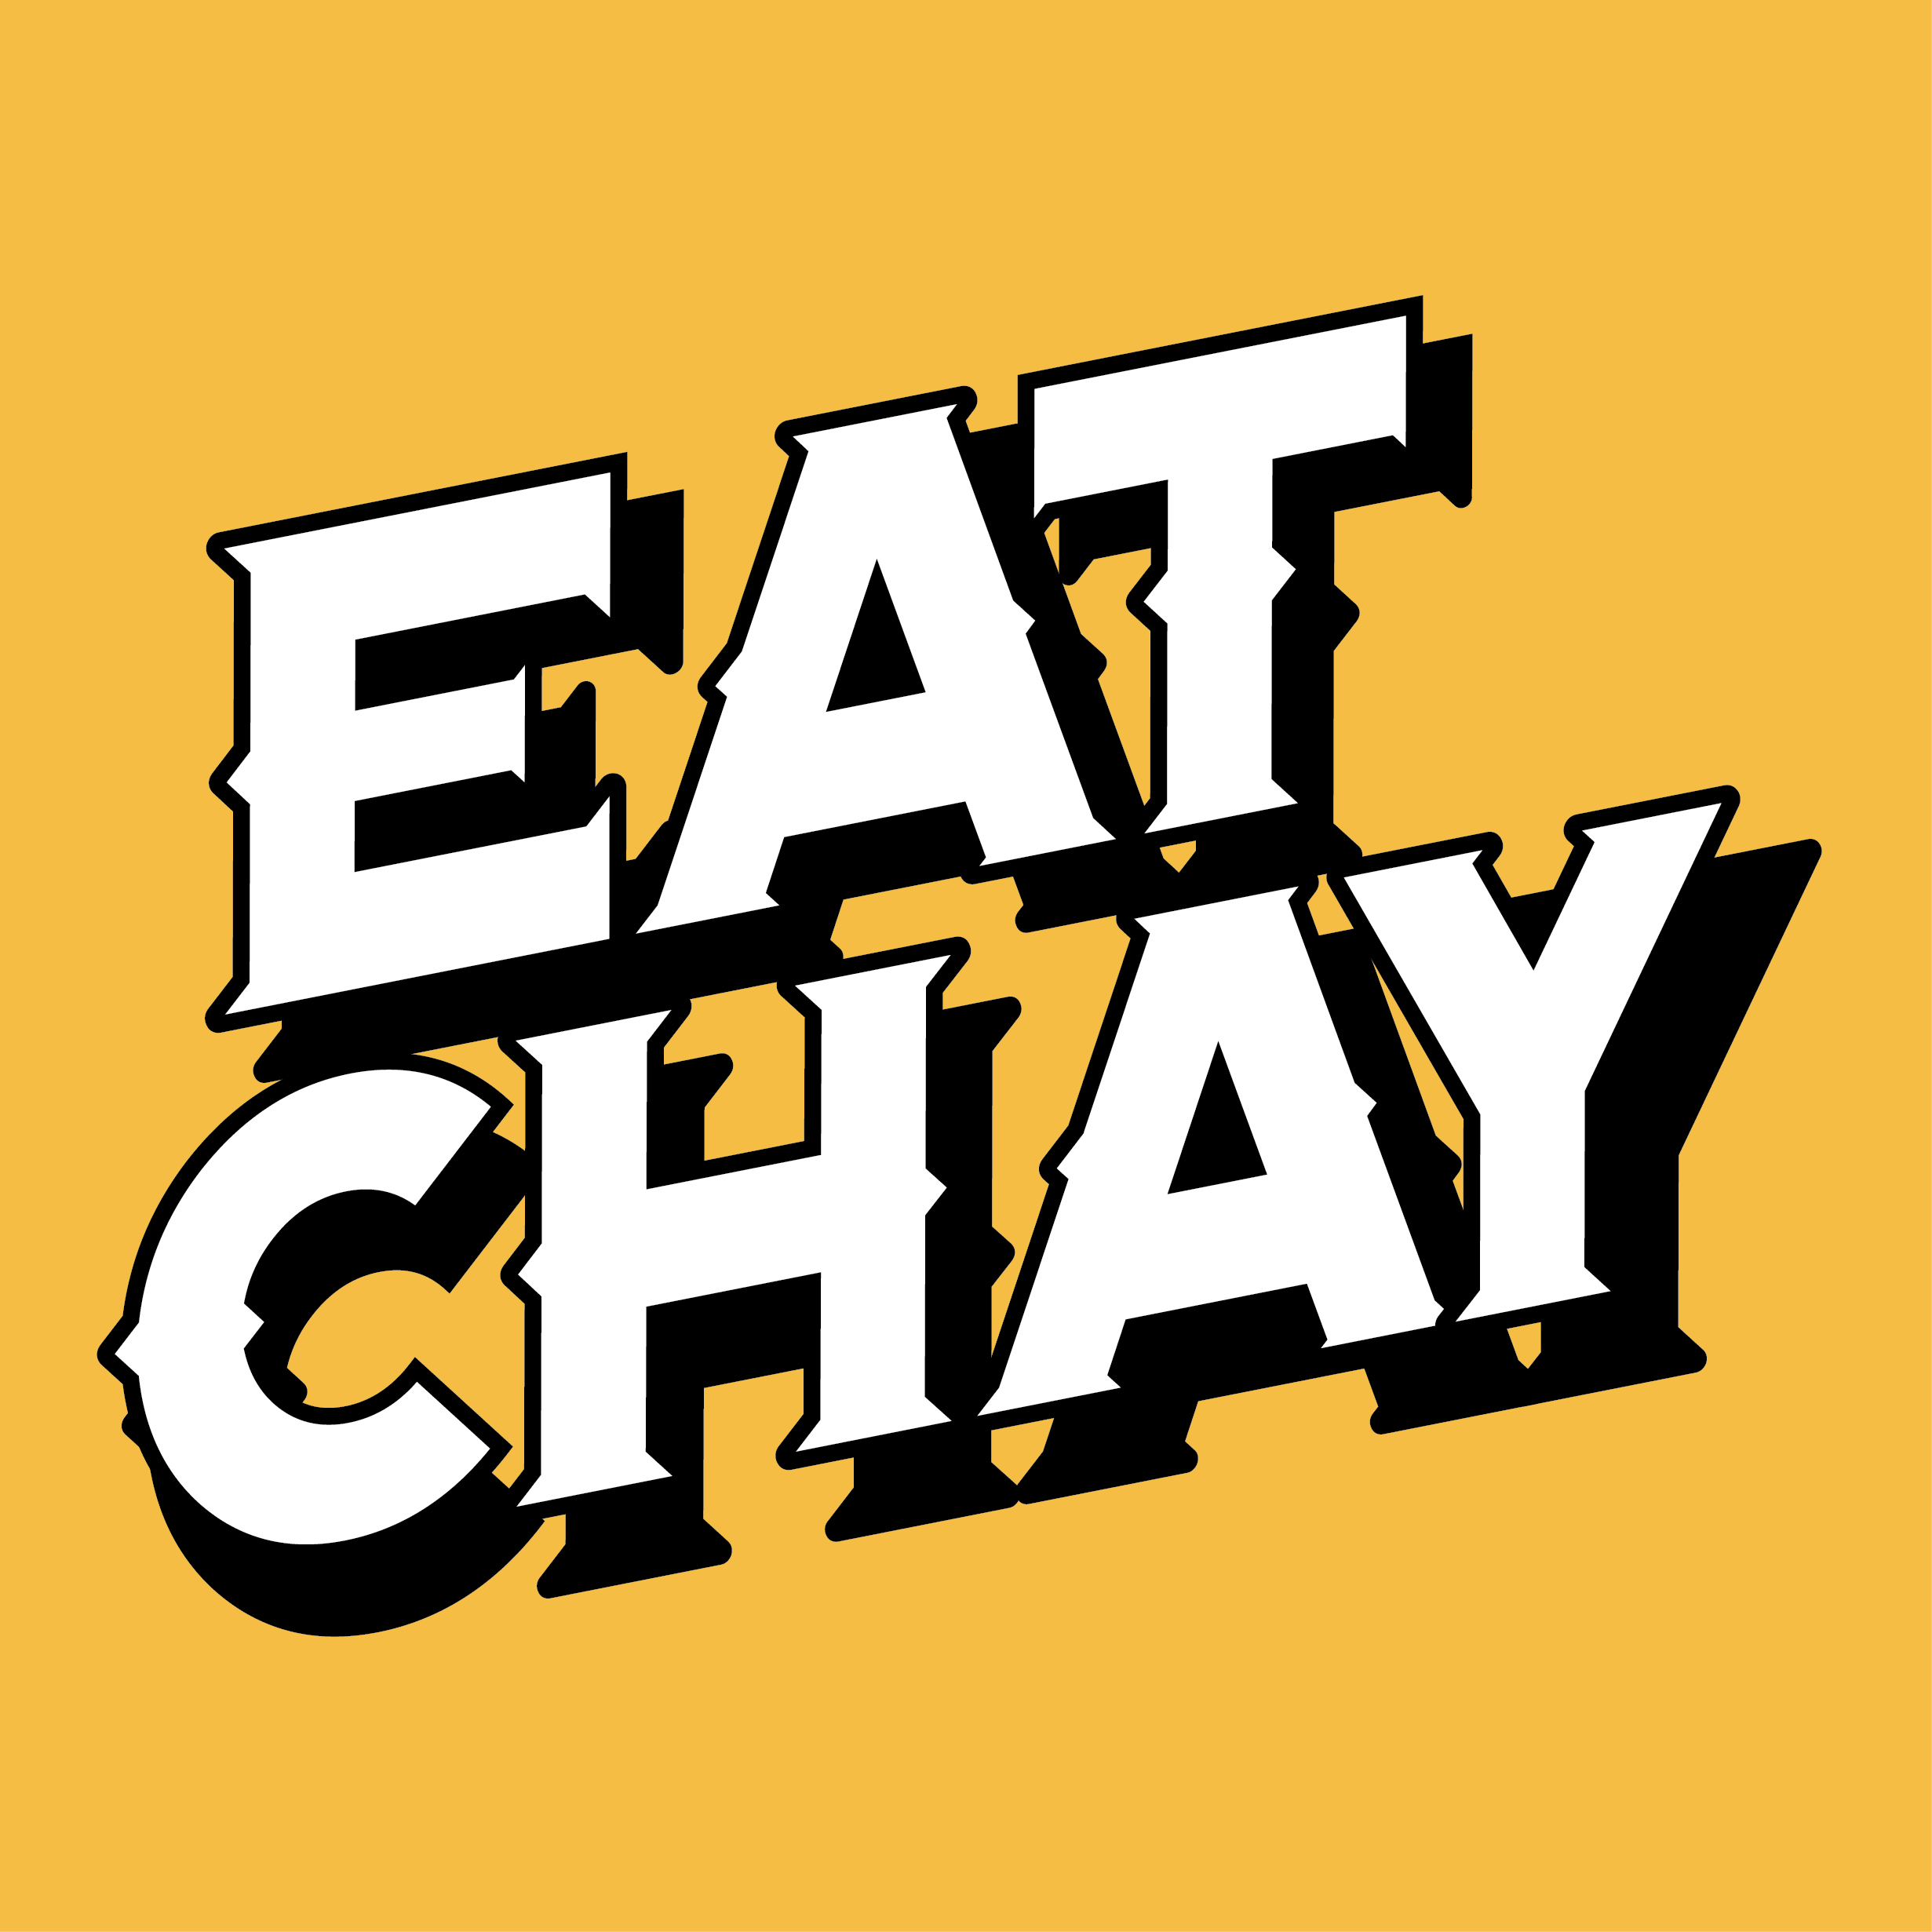 Eat Chay